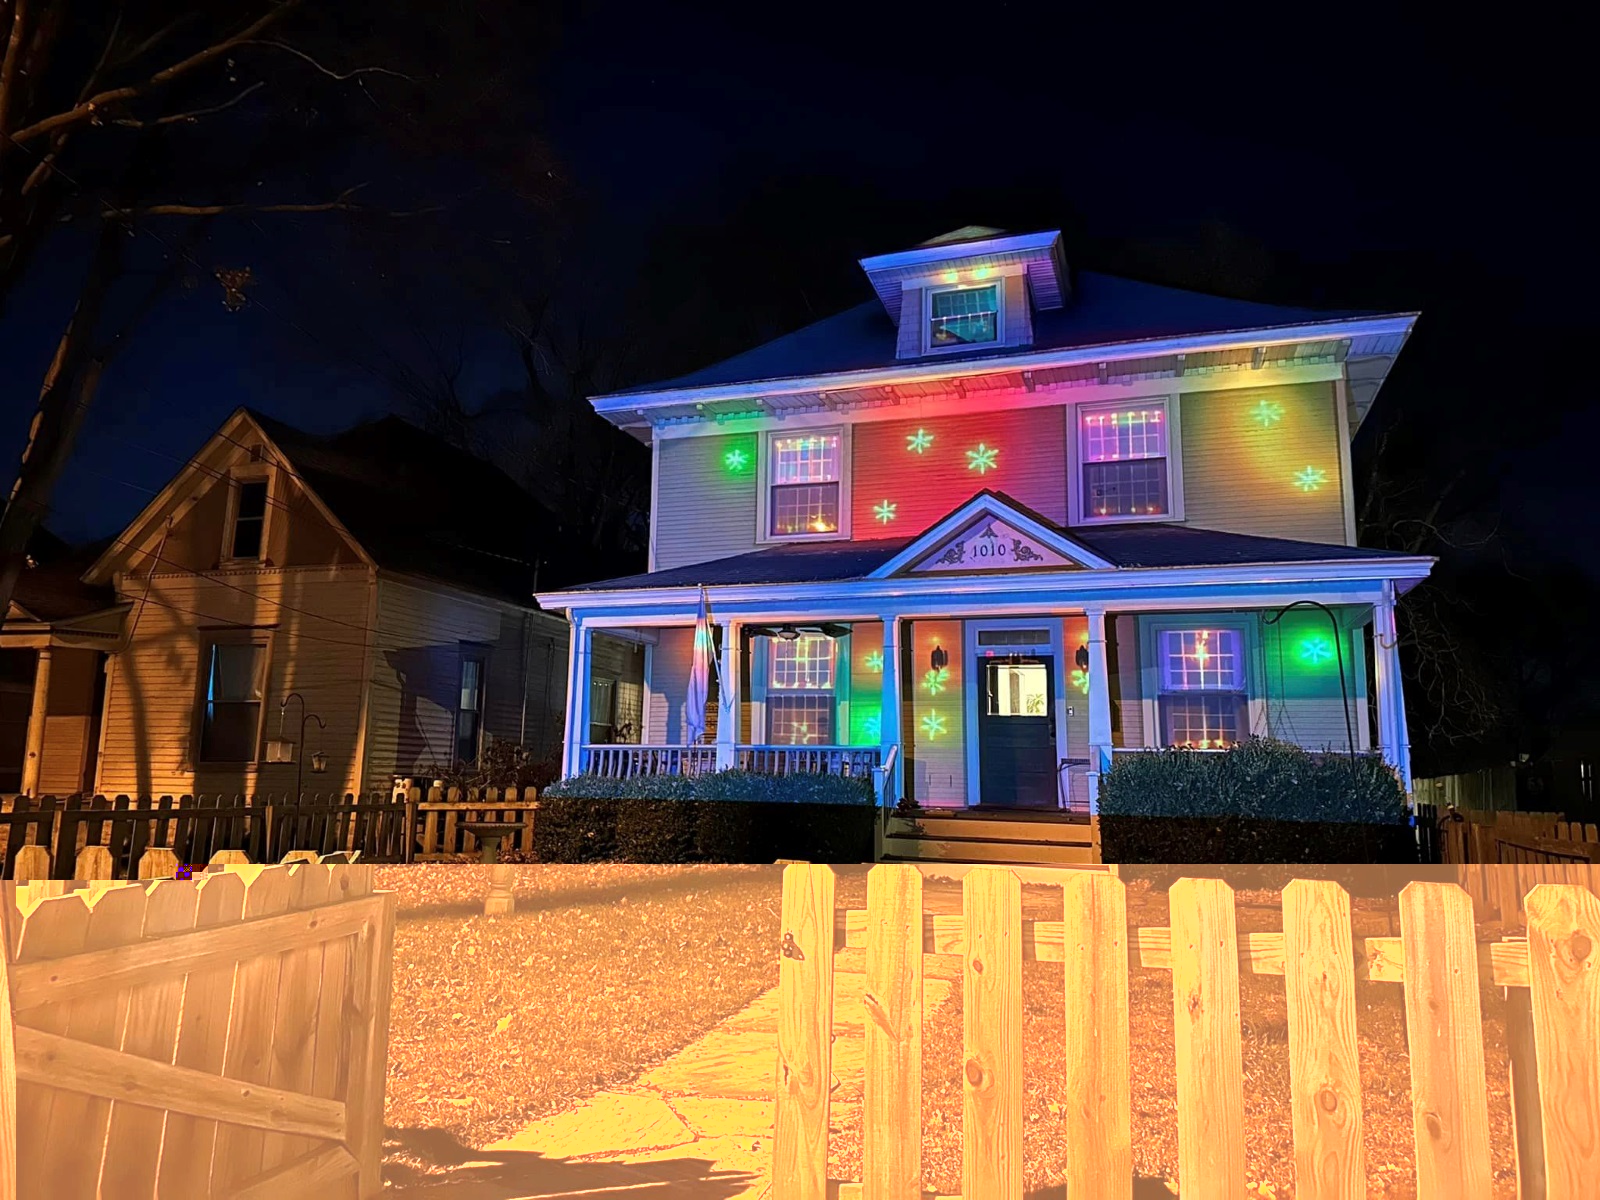 A Christmas display is projected onto the front of a two-story house